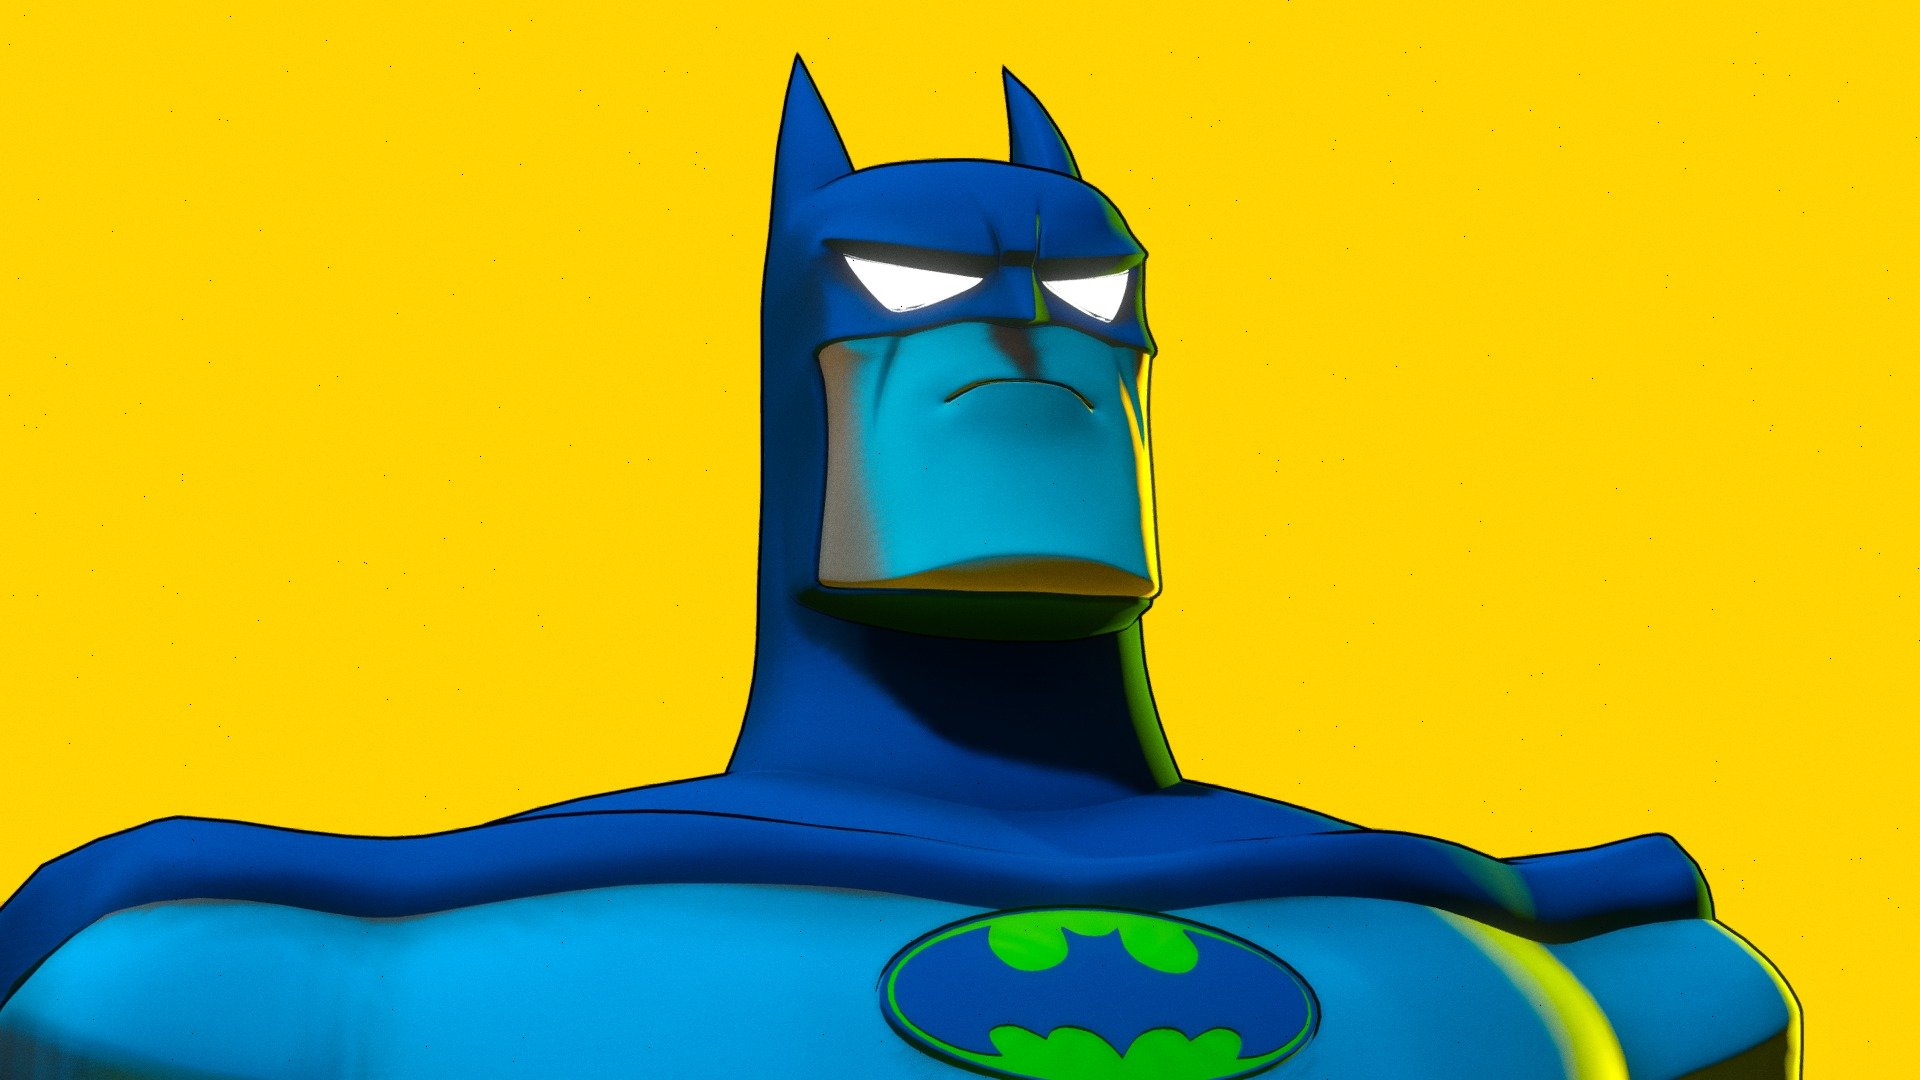 A 3D model based on &ldquo;Batman: The Animated Series